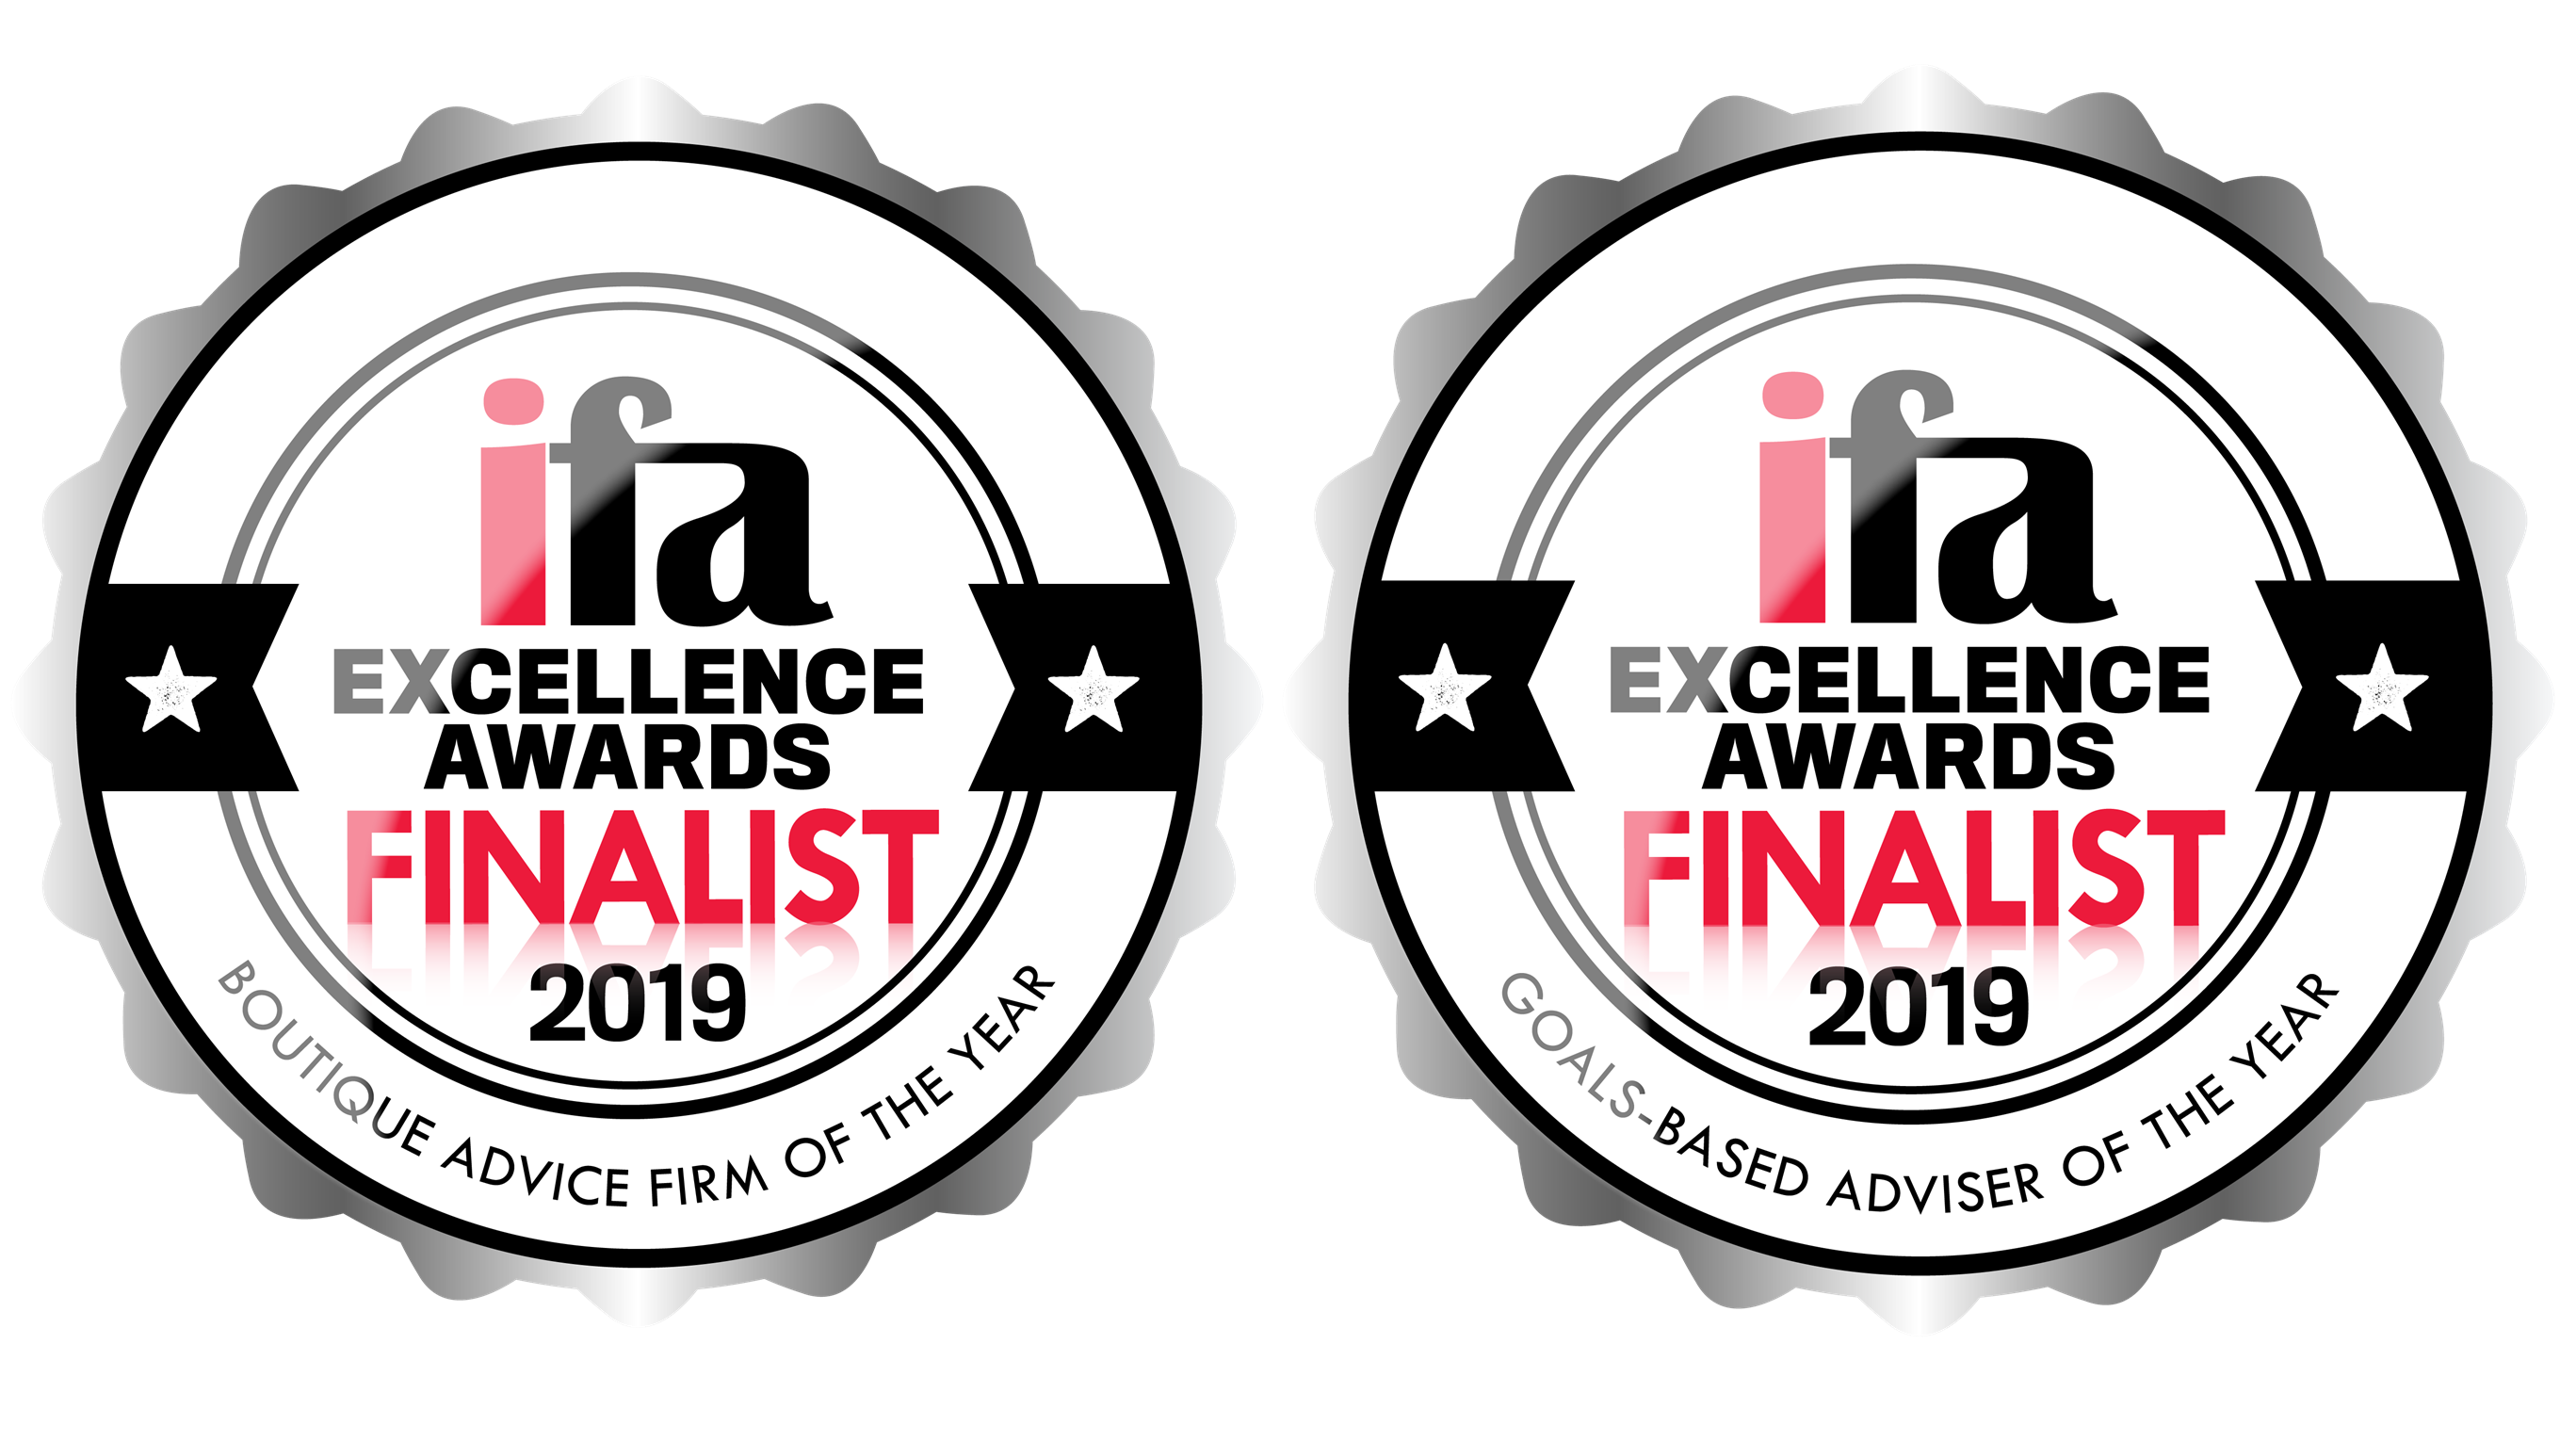 IFA Excellence Awards – 2019